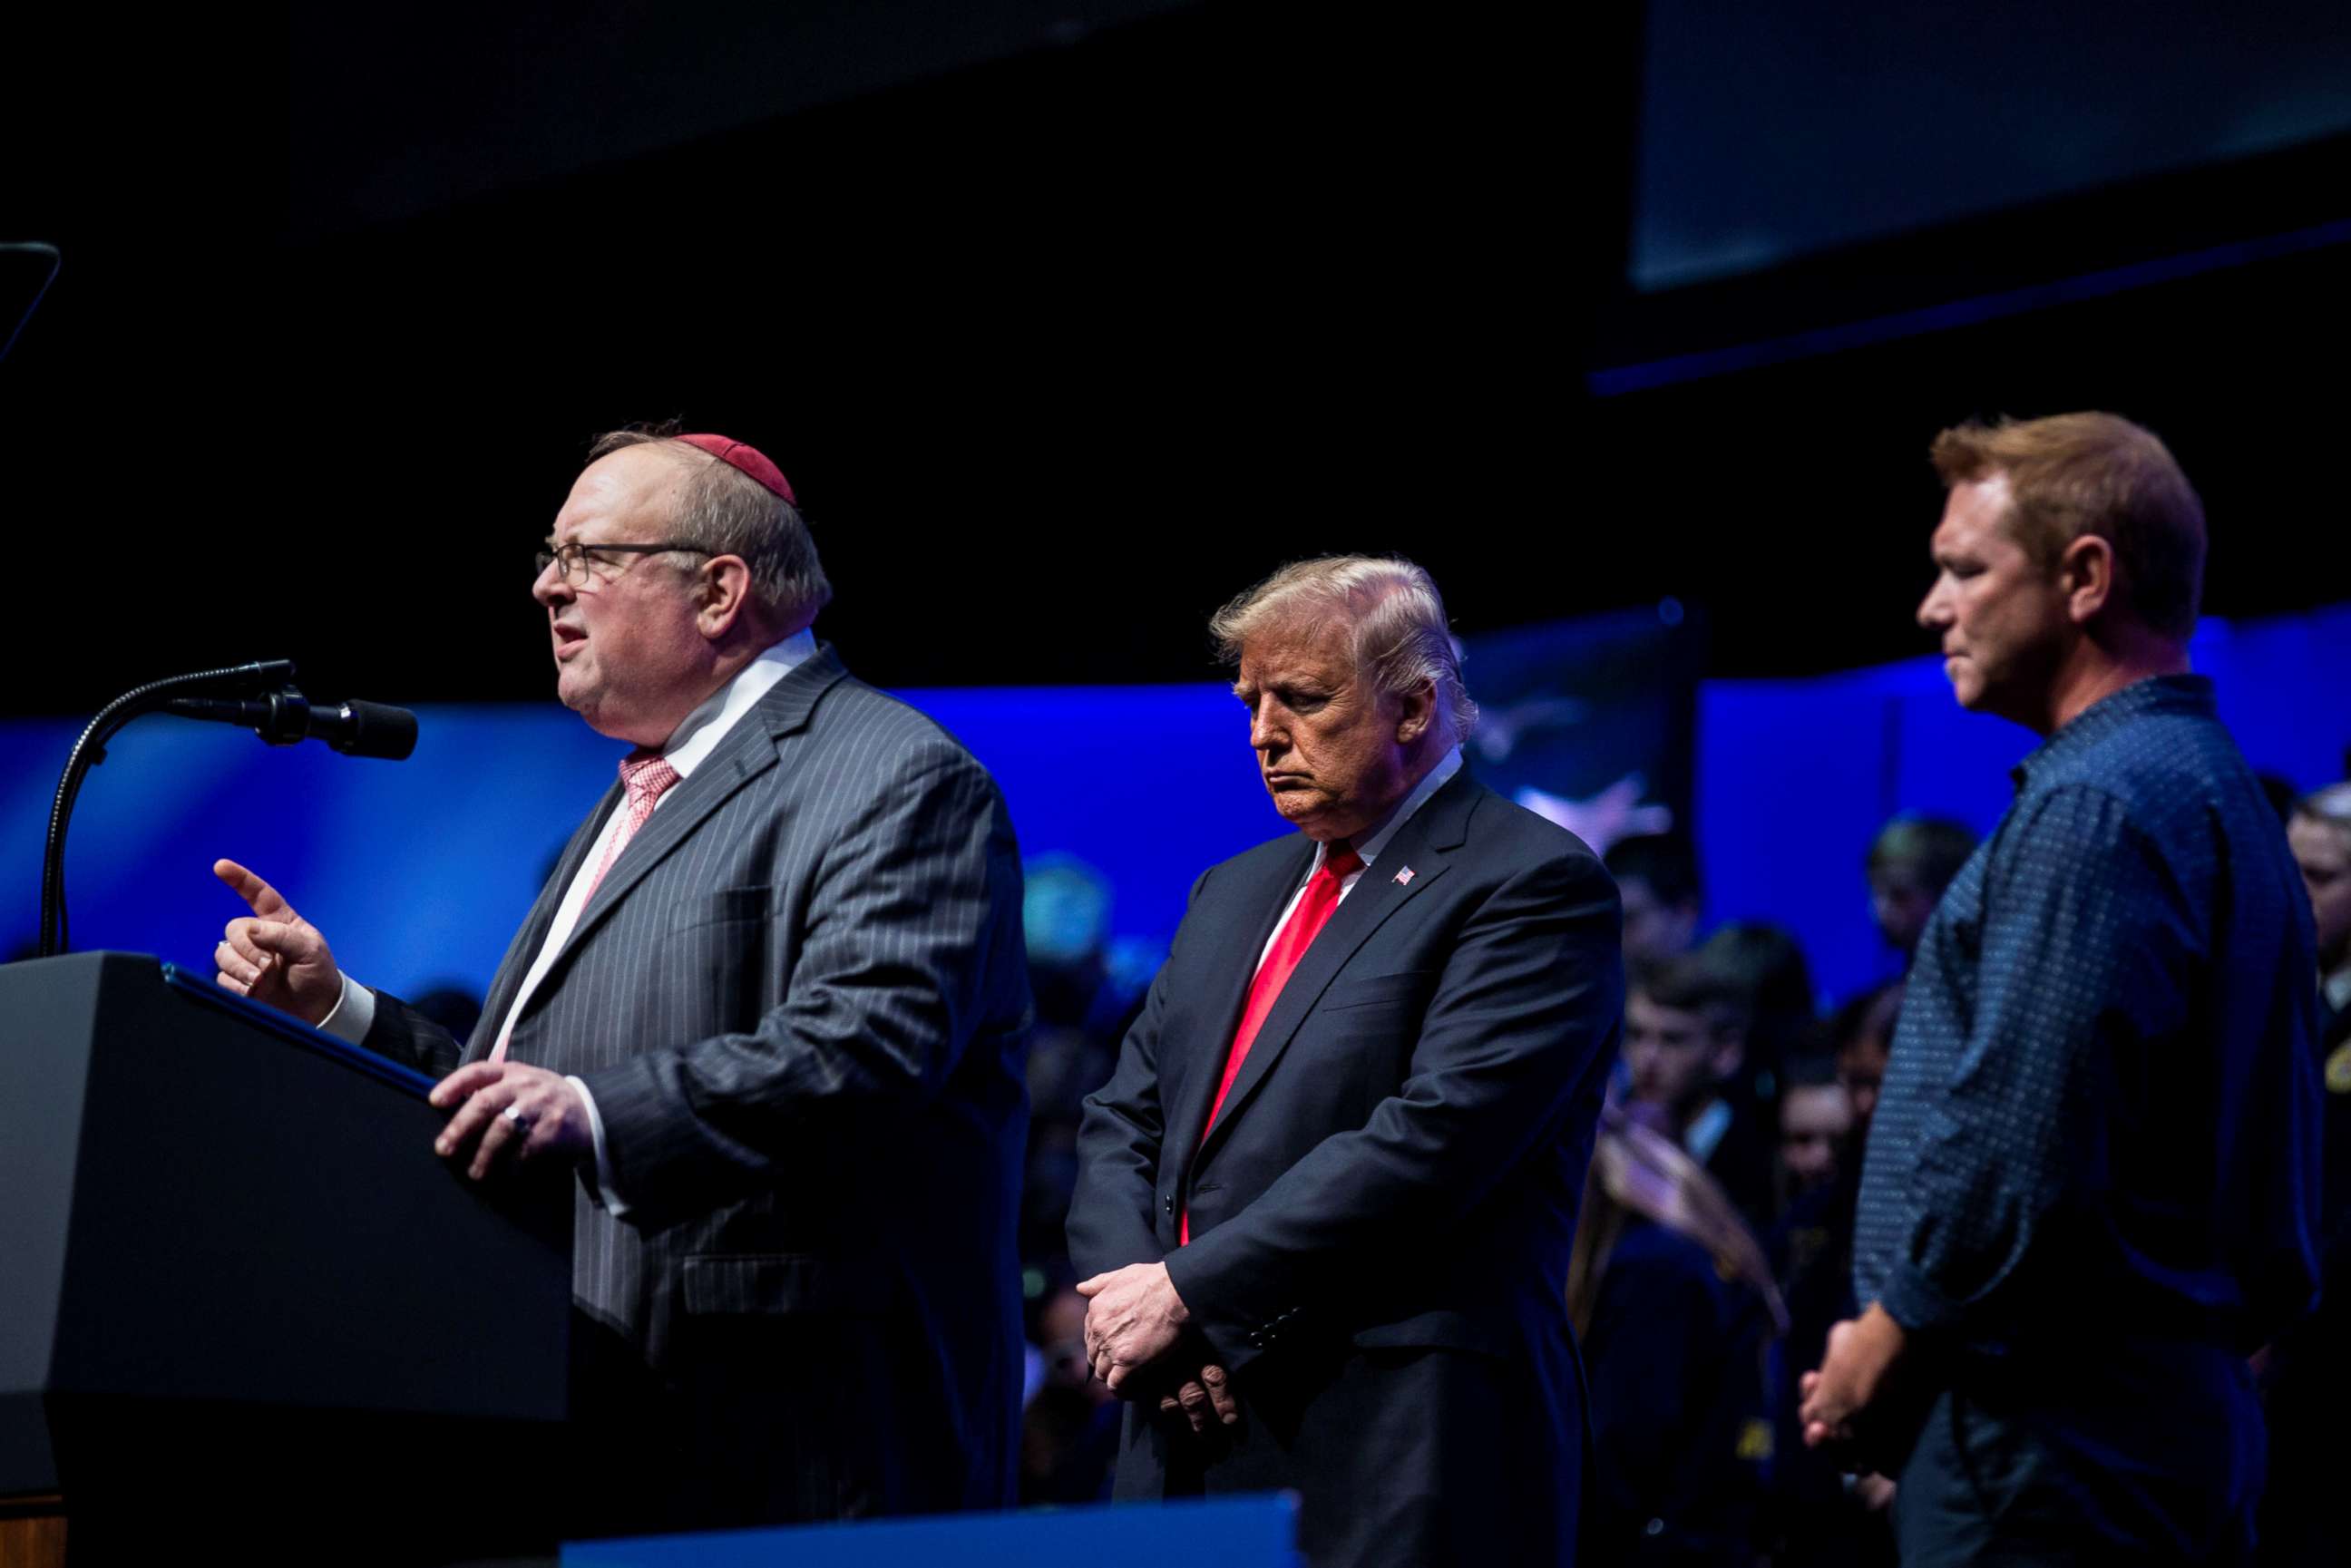 PHOTO: Rabbi Benjamin Sendrow leads a prayer alongside President Donald Trump and Pastor Thom O'Leary, at the 91st Annual Future Farmers of America Convention and Expo, in Indianapolis, Indiana.